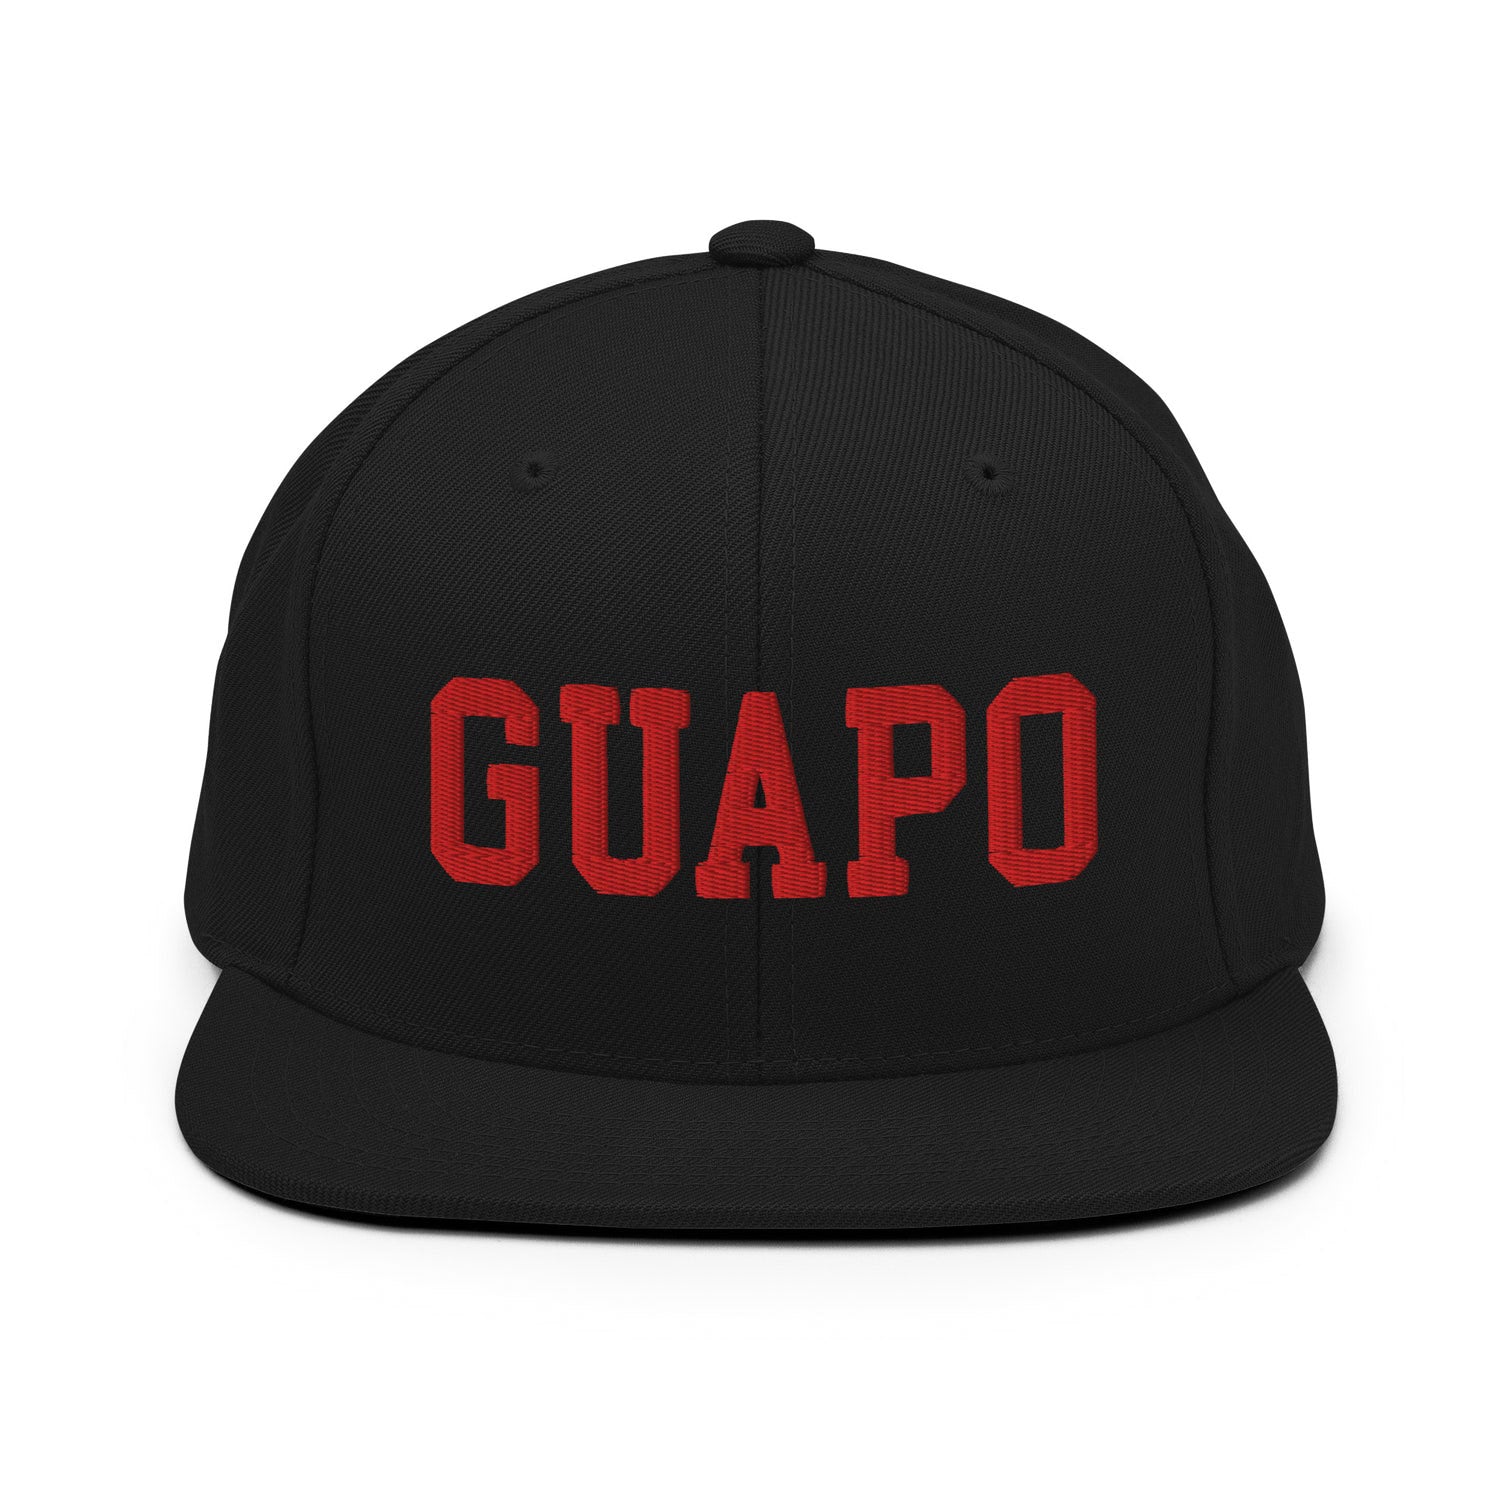 Black OG snapback cap baseball hat with embroidered red letters that say, "GUAPO"